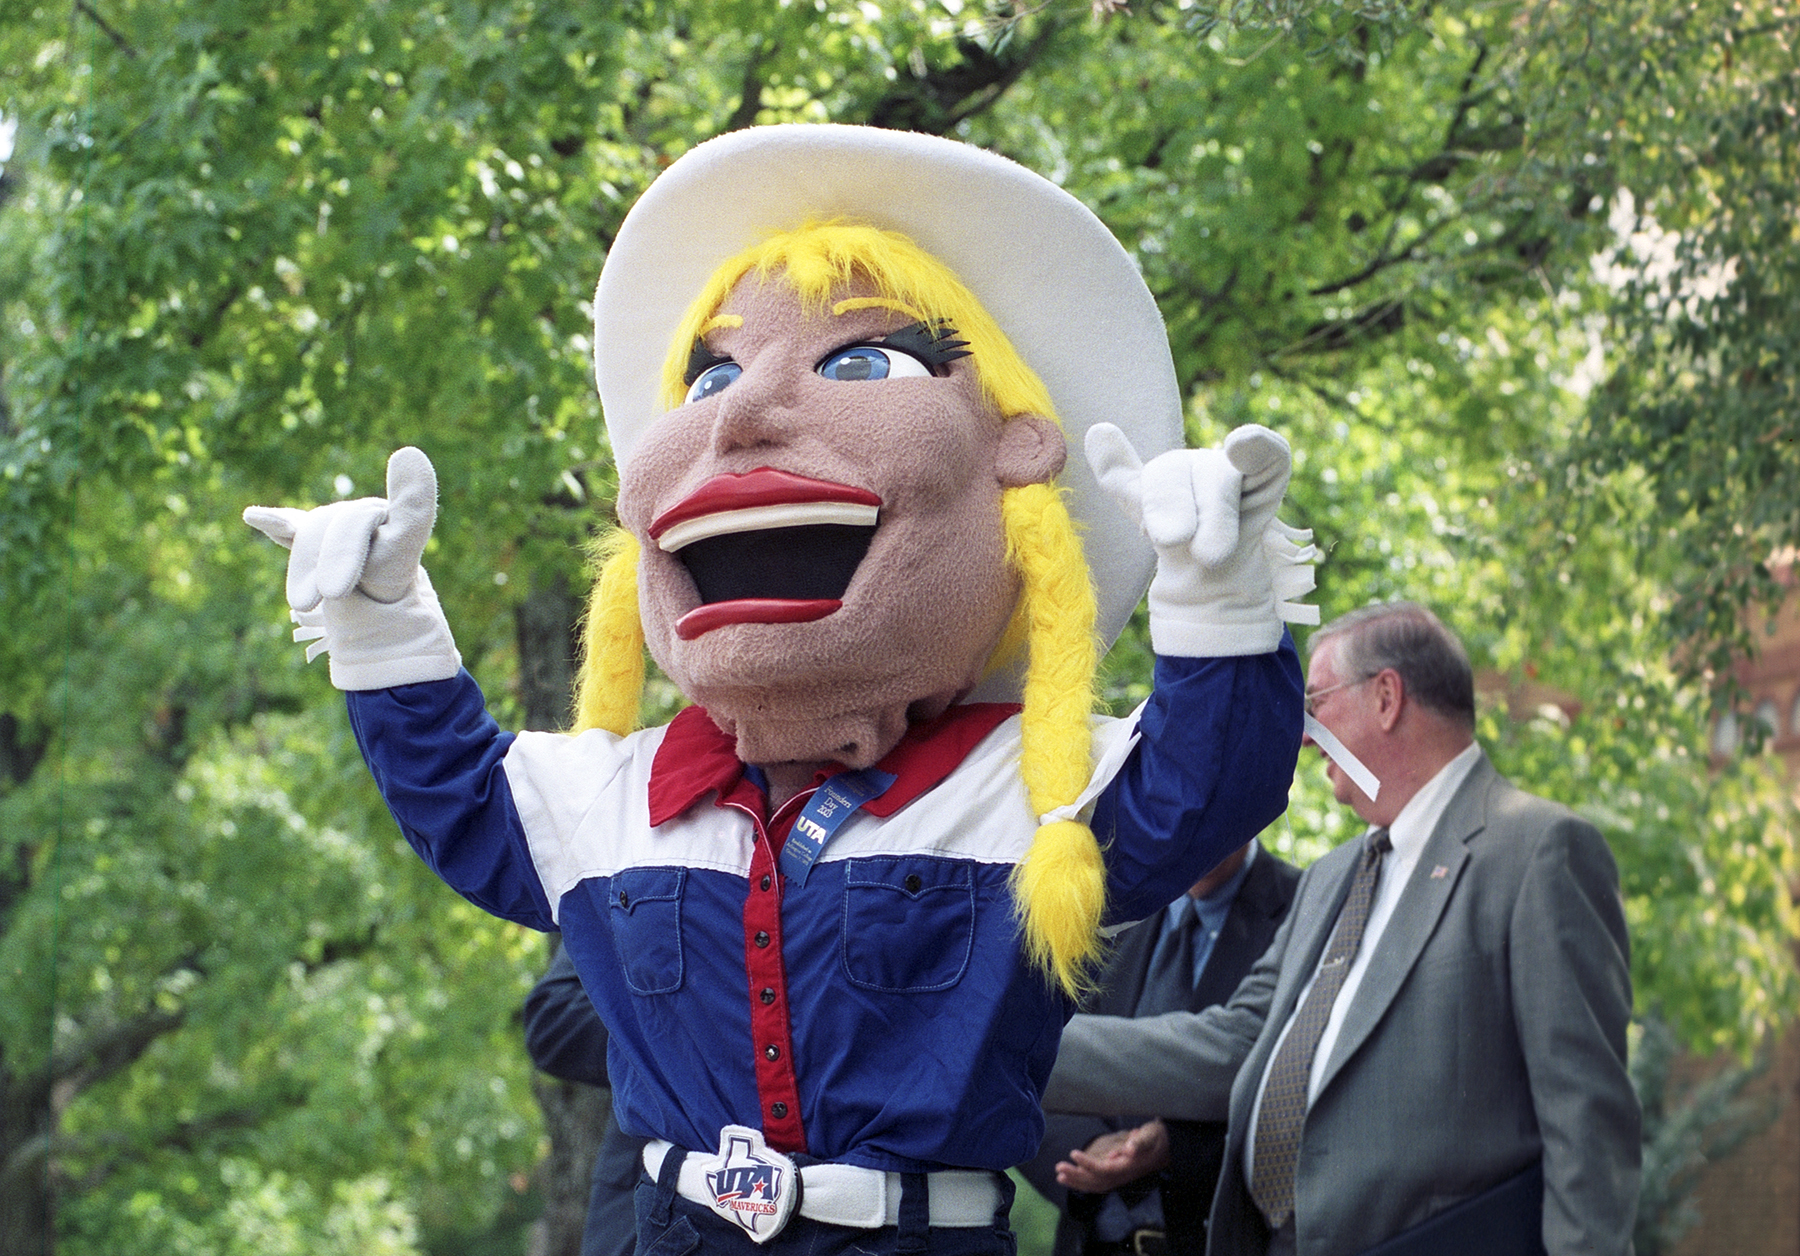 Color photo of a mascot with braided pigtails and a large cowboy hat, which is giving the "Maverick" sign with both of its hands.